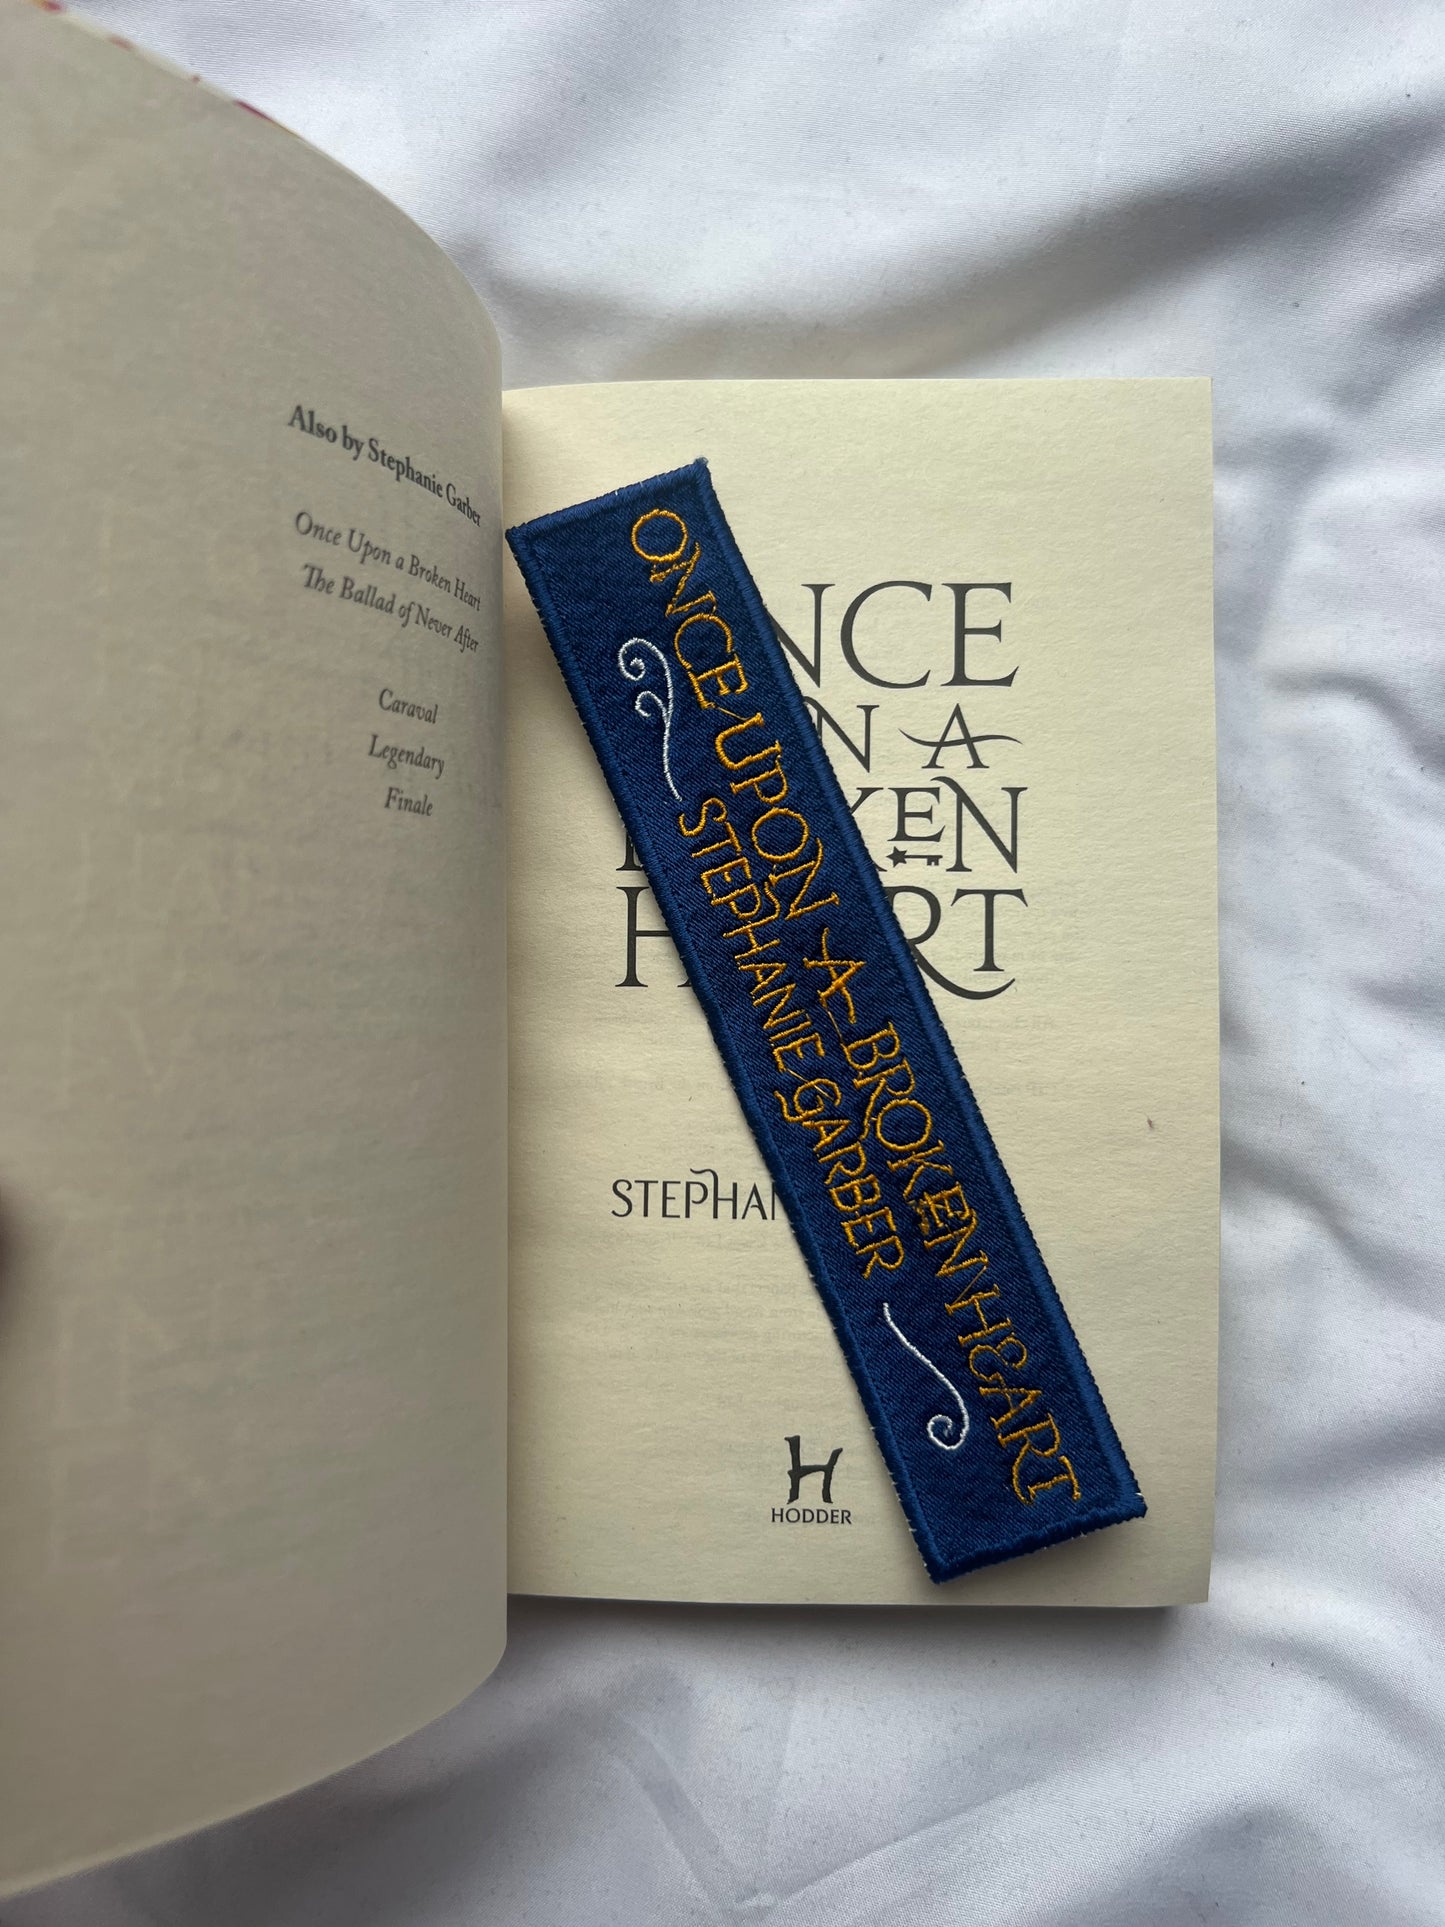 Once Upon A Broken Heart Embroidered bookmark